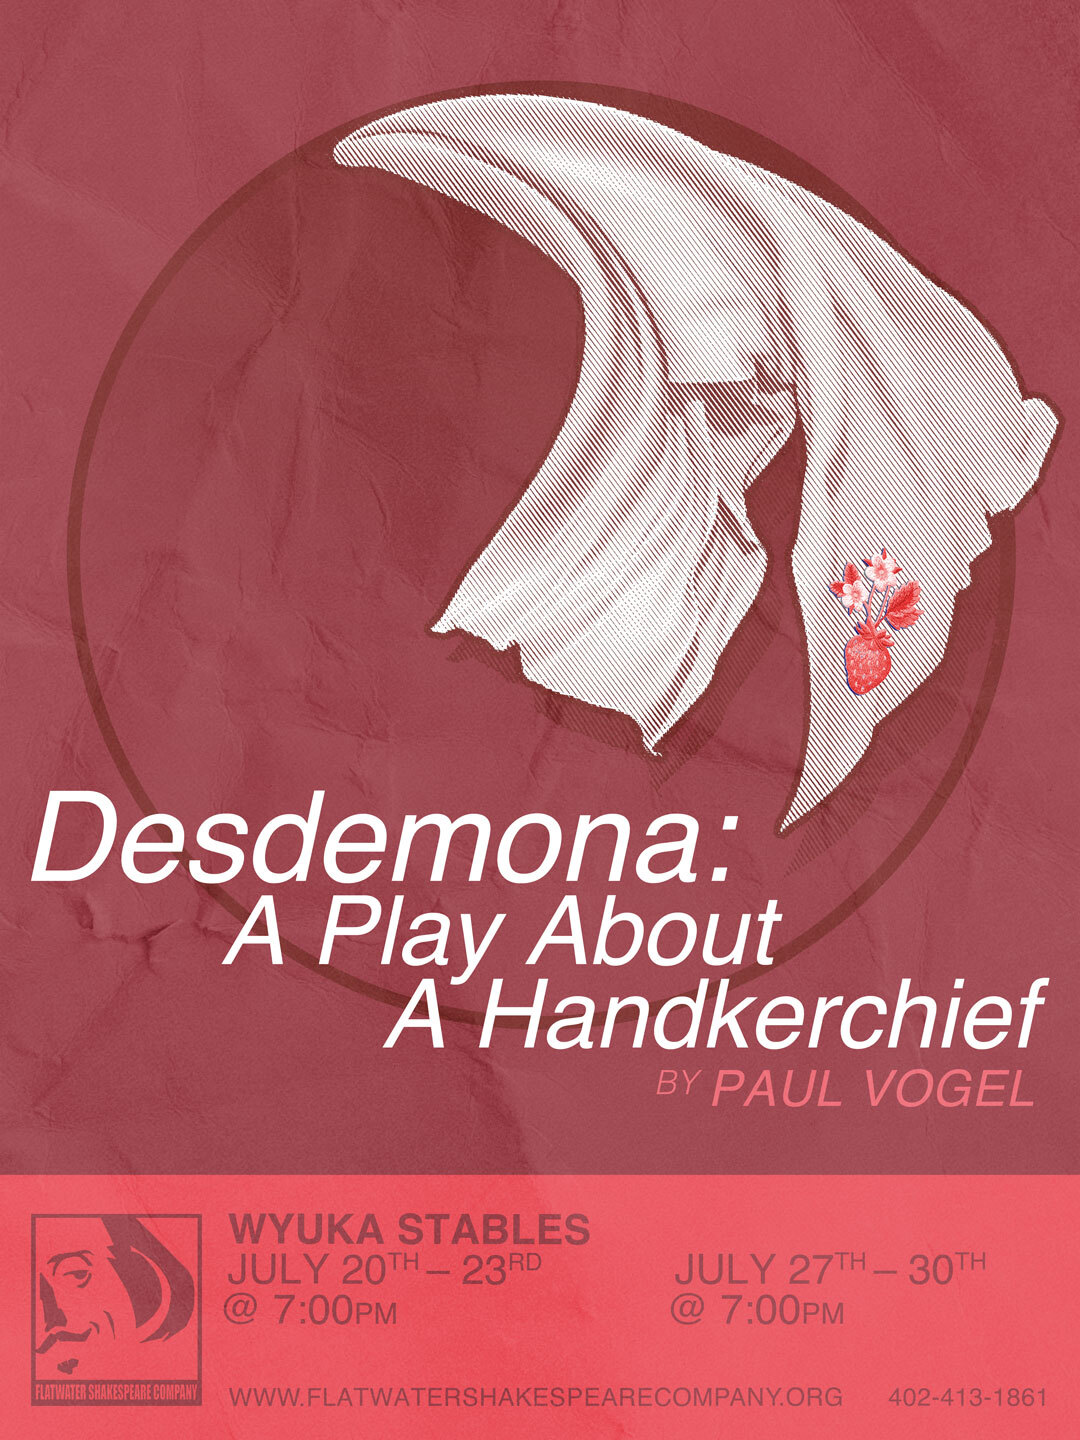 7/21 STU - STUDENT: Friday. July 21, 2023 | 7:00 p.m. - 10:00 p.m. CST | Wyuka Stables (Desdemona: A Play about a Handkerchief)